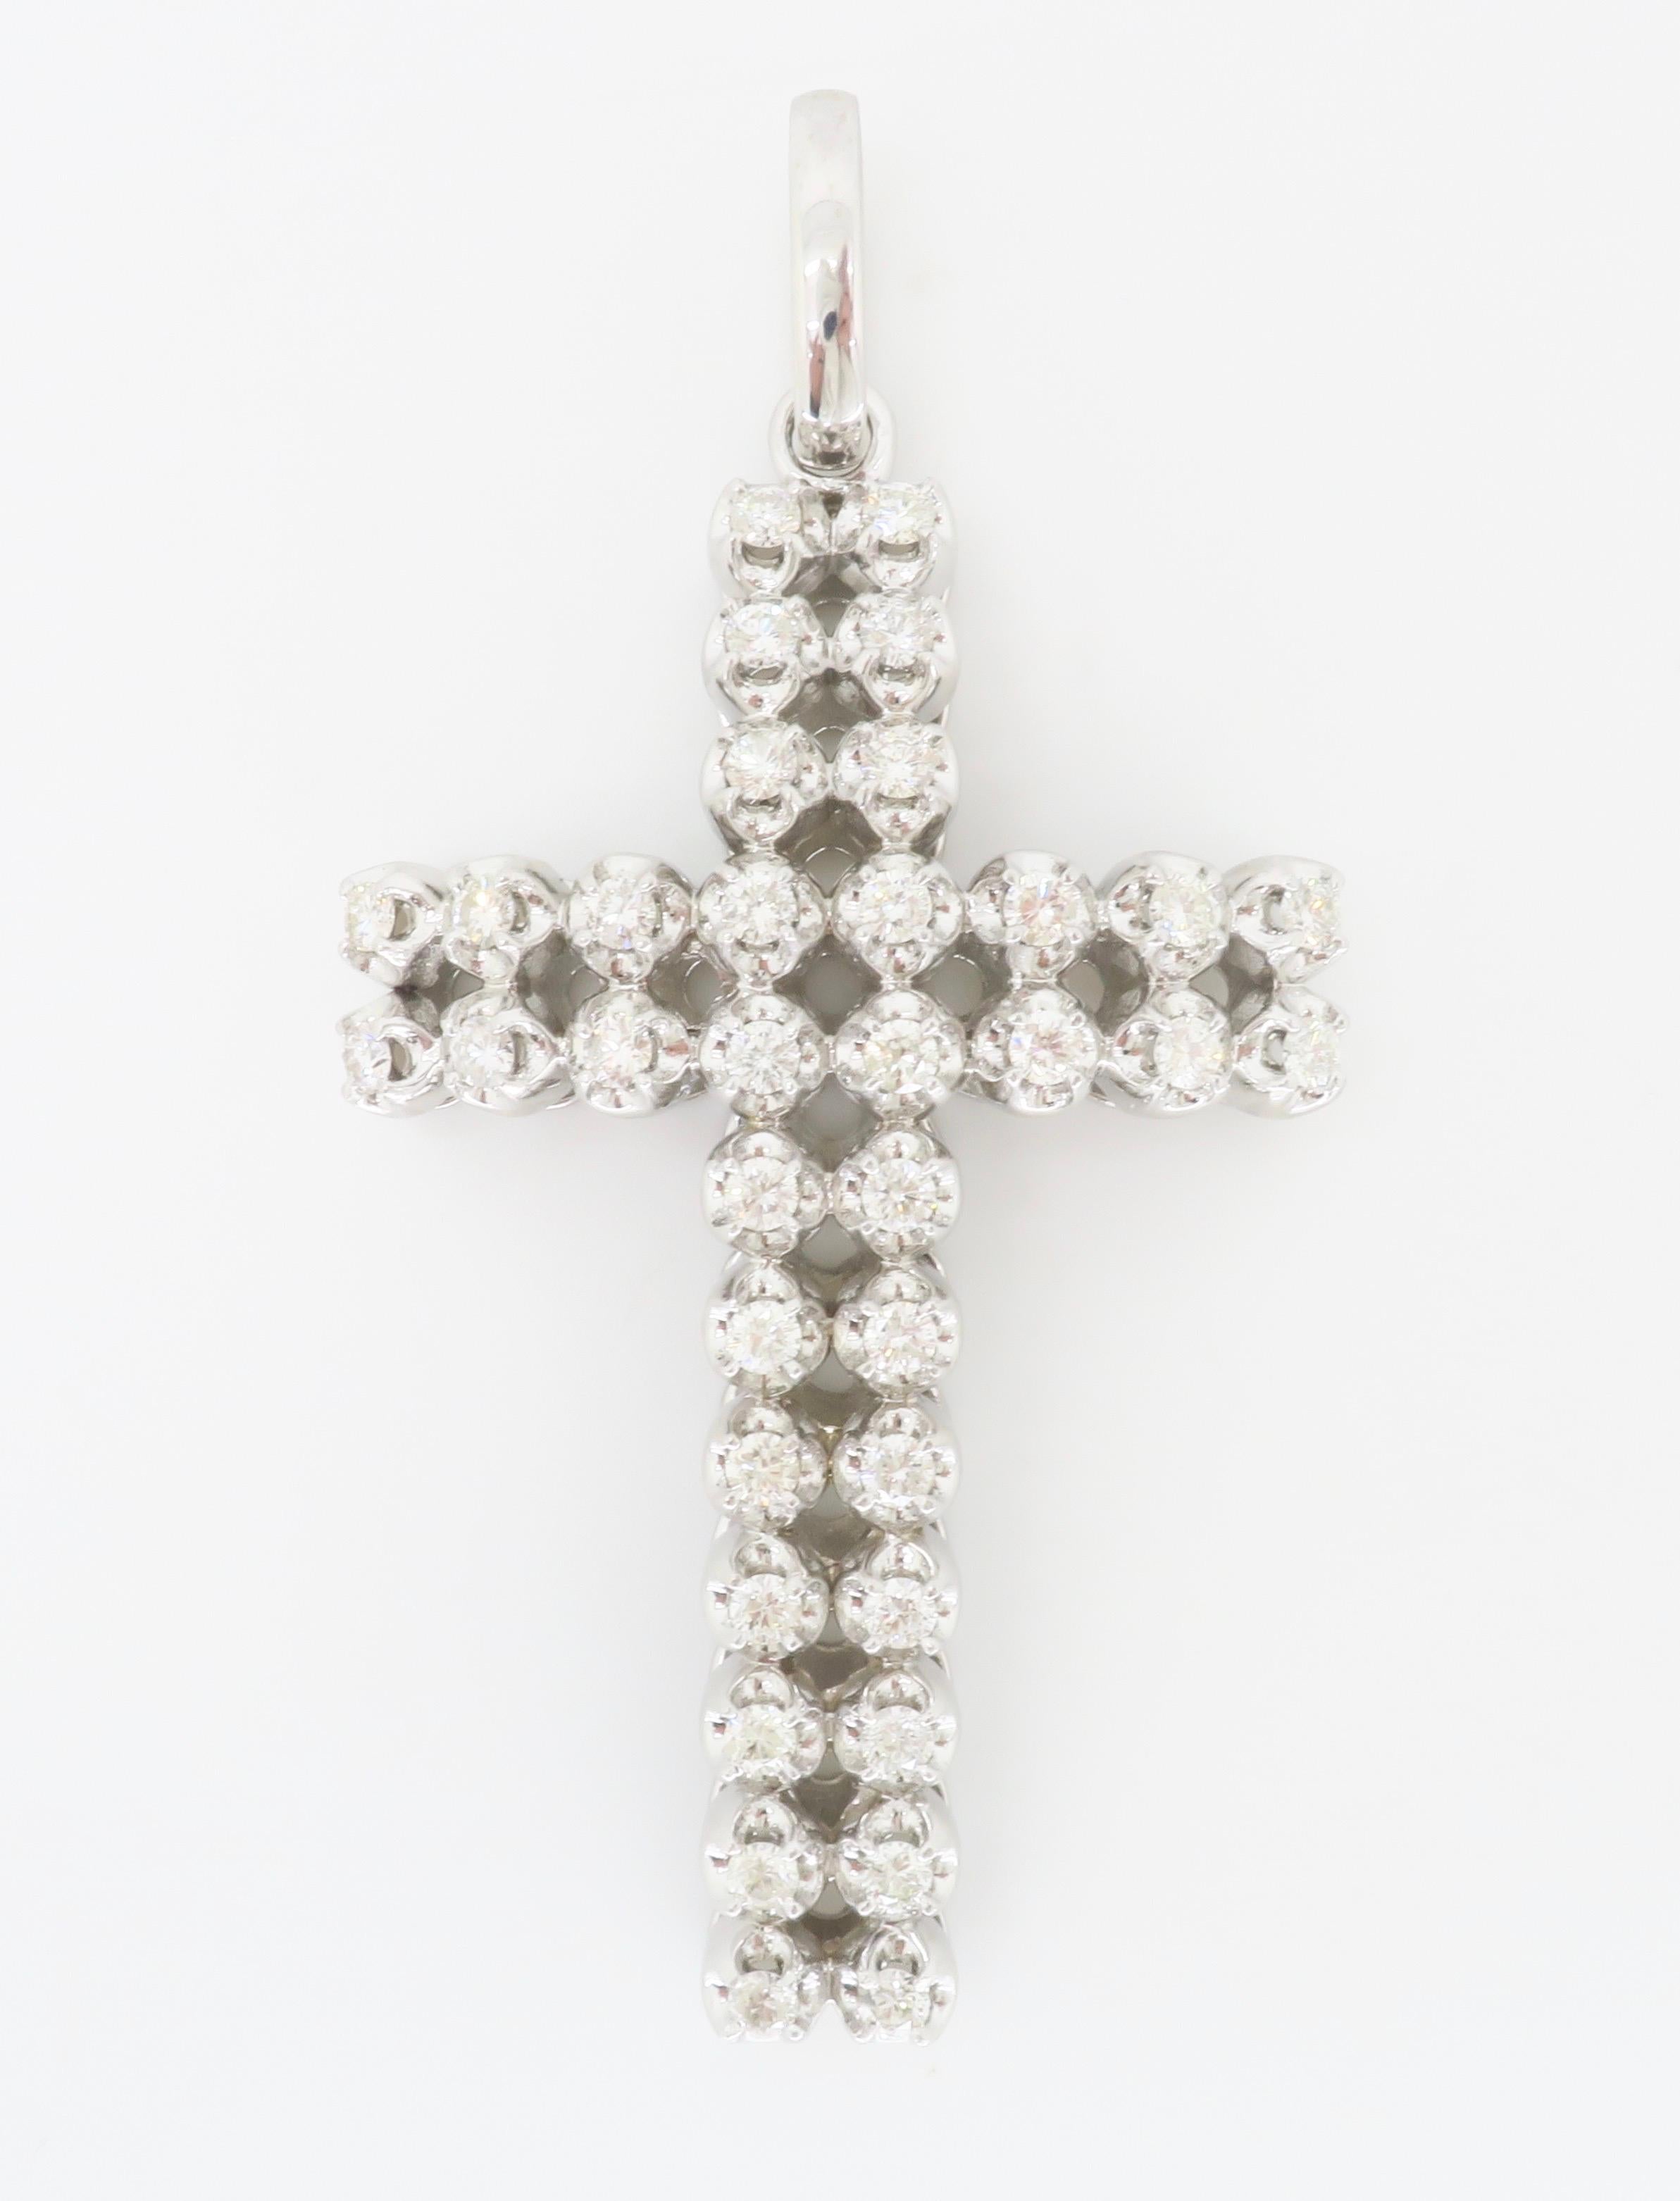 Large 3.80CTW Diamond Cross Pendant made in 14k White Gold  For Sale 6